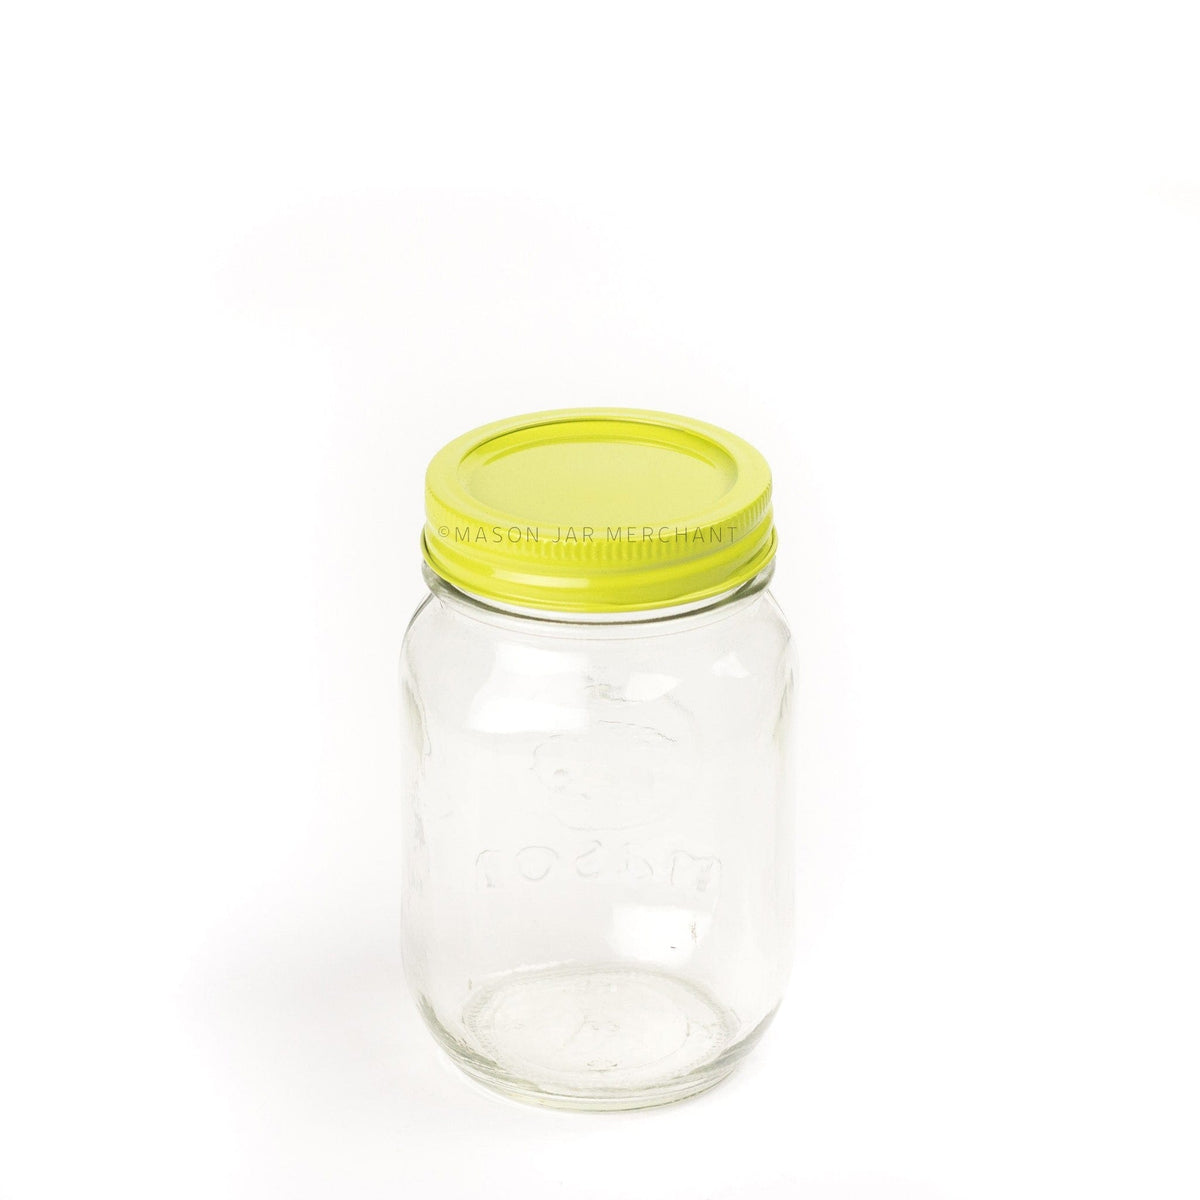 A lime green painted lid on a regular mouth jar